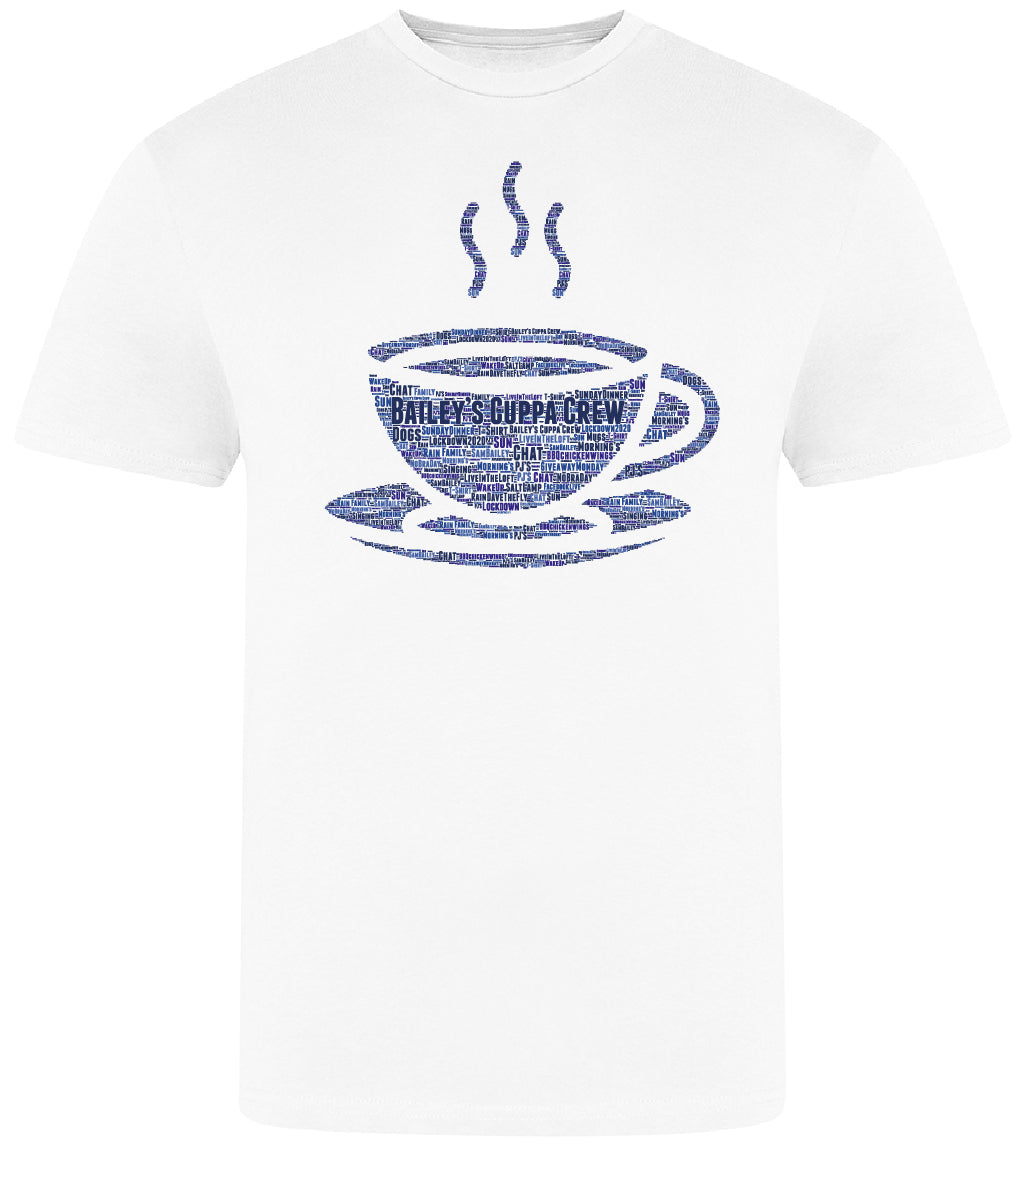 Bailey's Cuppa Crew Special Edition Wording Design T-Shirt